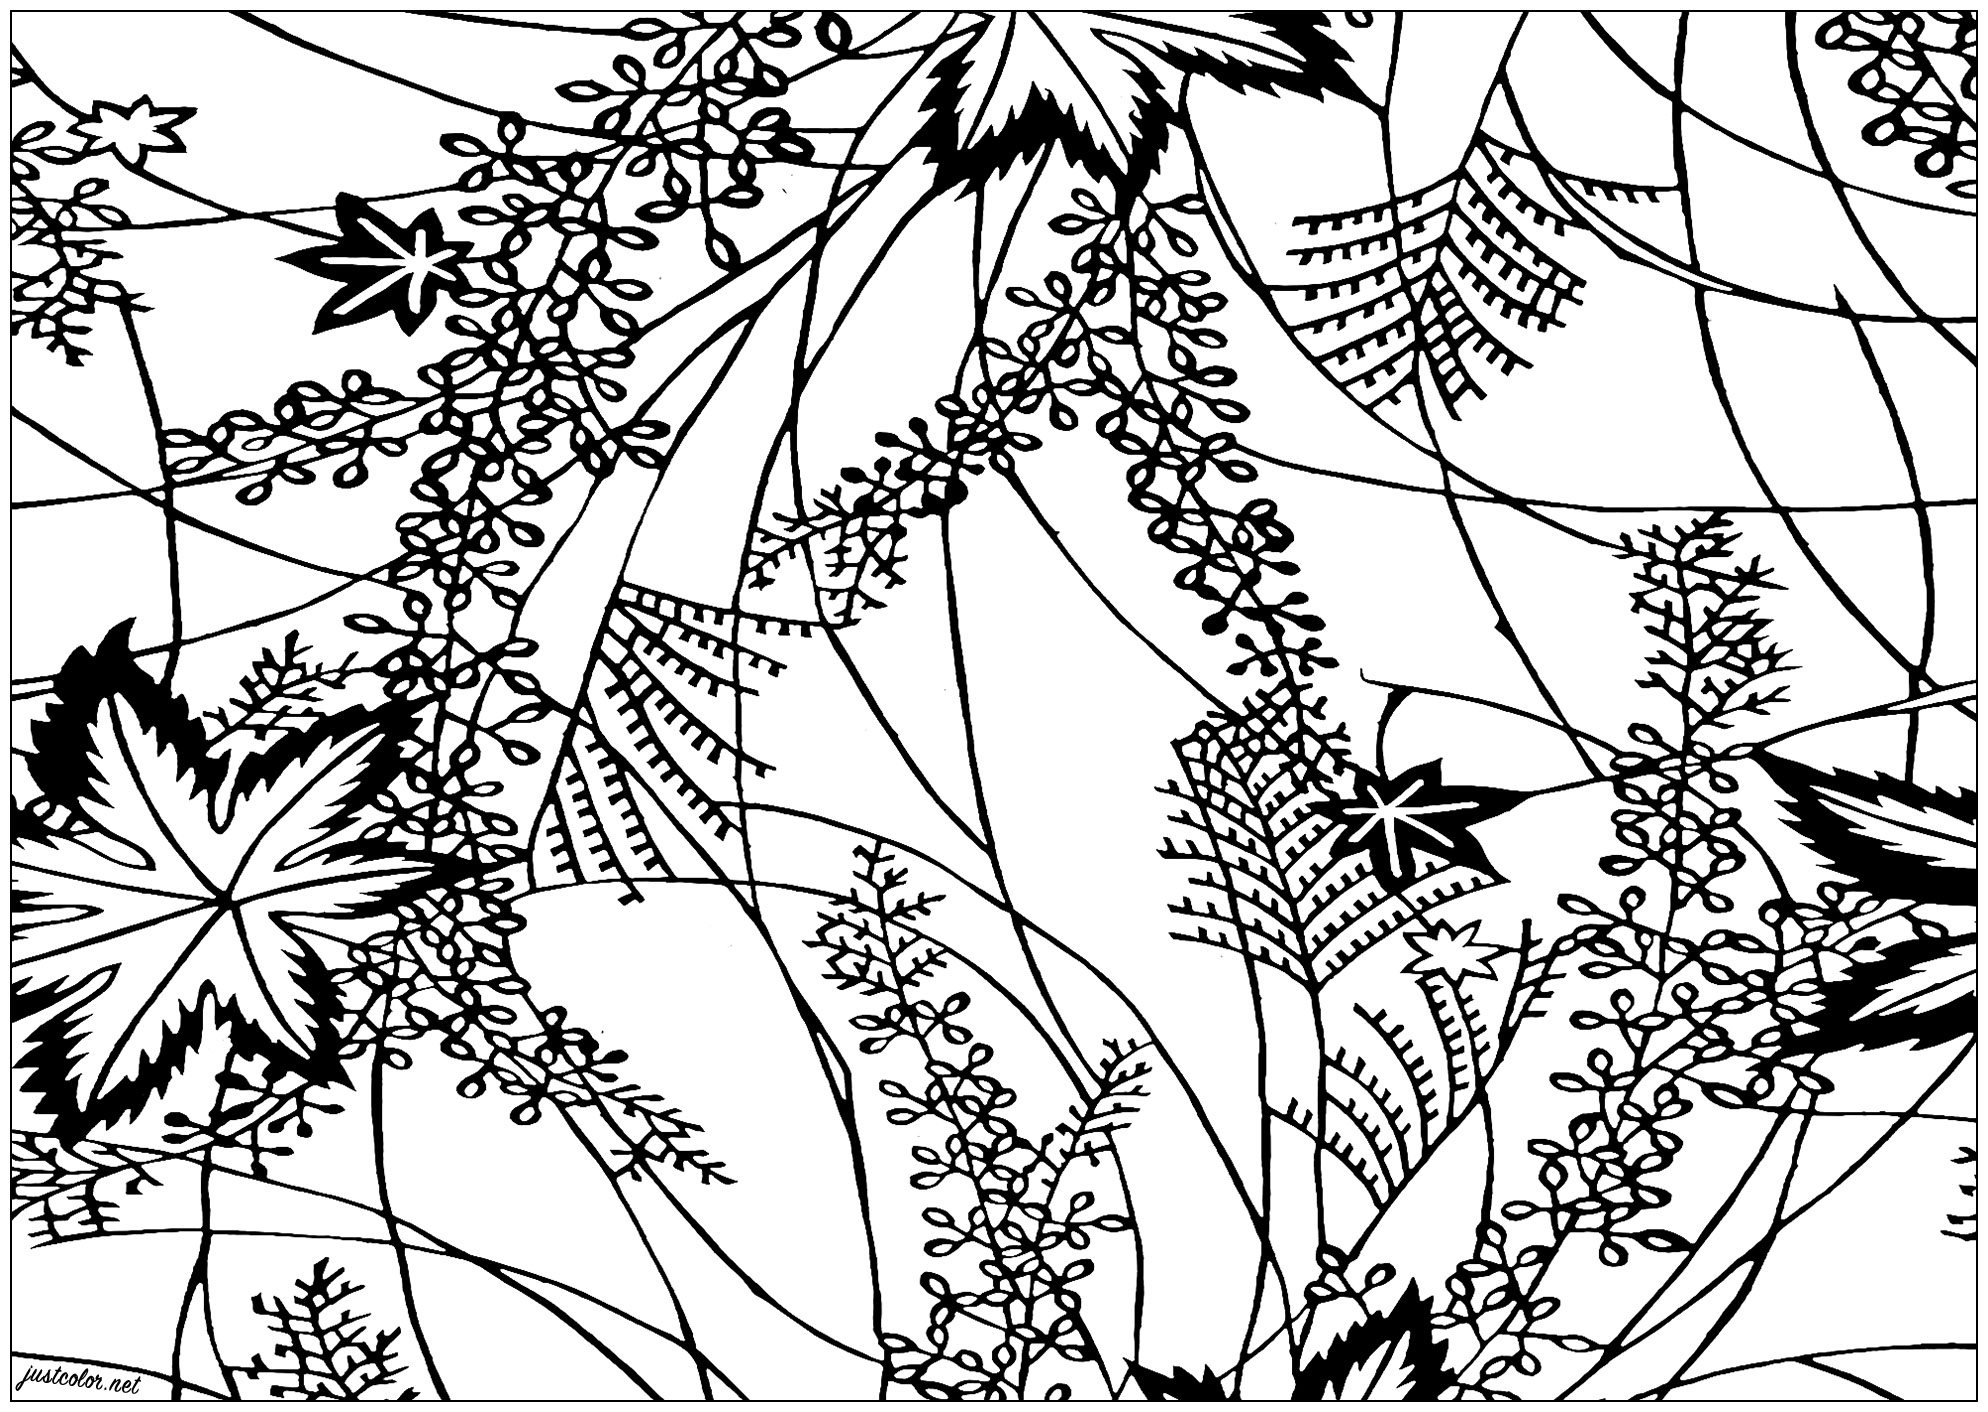 Coloring page created from a Traditional Japanese Stencil Design - model 2 - Zoom 1. The stencils are made from pieces of paper layered one on top of one another, stuck together using persimmon sap, making the material impermeable, and then cut. A mesh of silk thread is stretched between the two parts of the decoration to hold everything in place. One stencil is needed per color.Their size depends on the width of the panel making up the kimono.